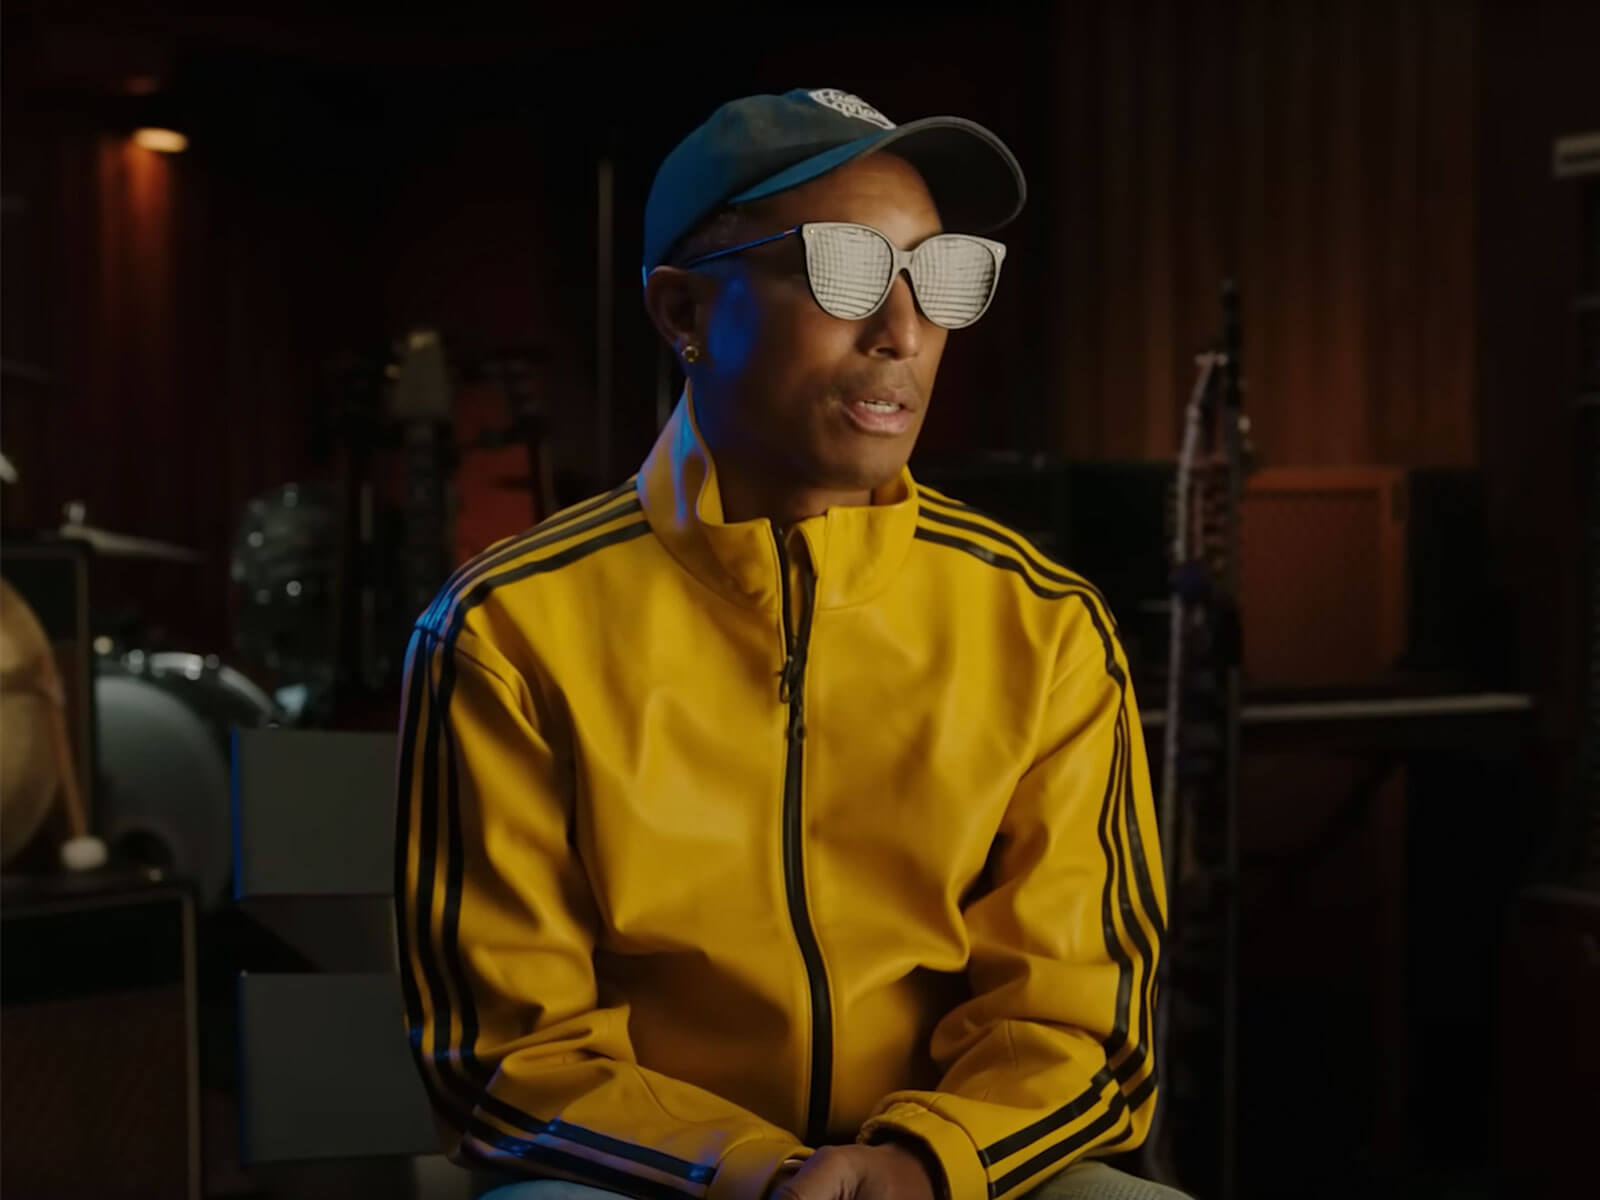 Daft Punk Reveals Unseen Footage of Pharrell Williams Hearing 'Get Lucky' for the First Time